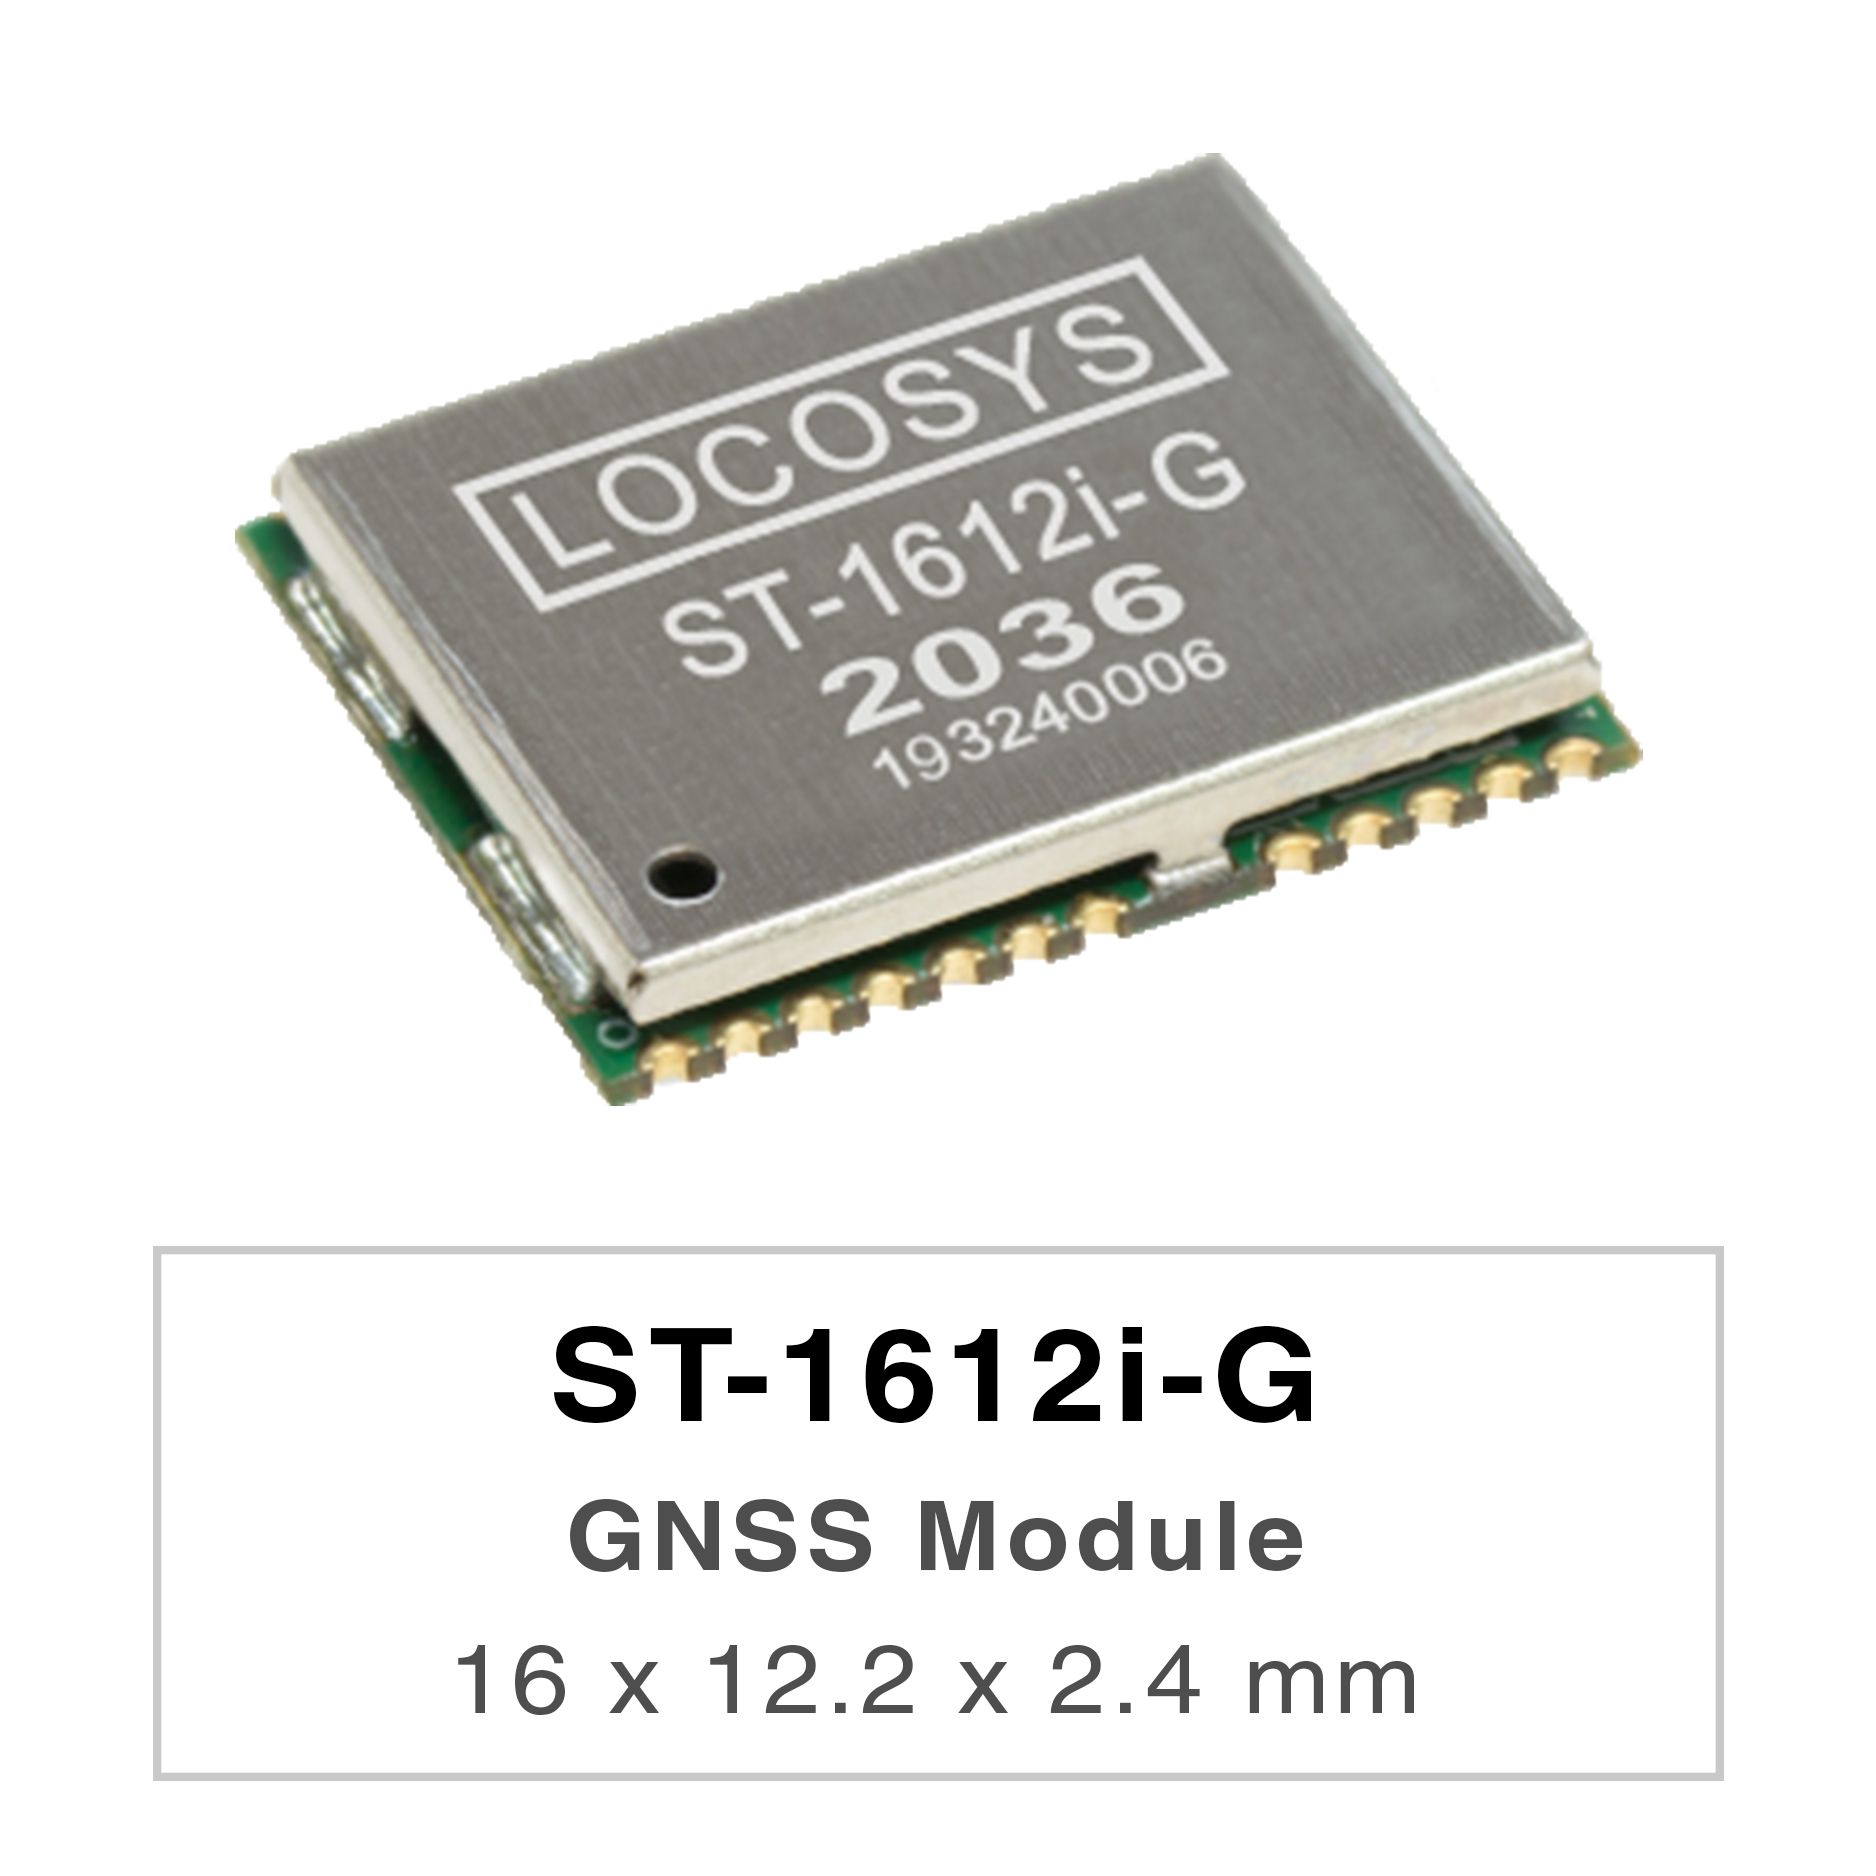 LOCOSYS ST-1612i-G module can simultaneously acquire and track multiple satellite constellations that
include GPS, GLONASS, GALILEO and QZSS.